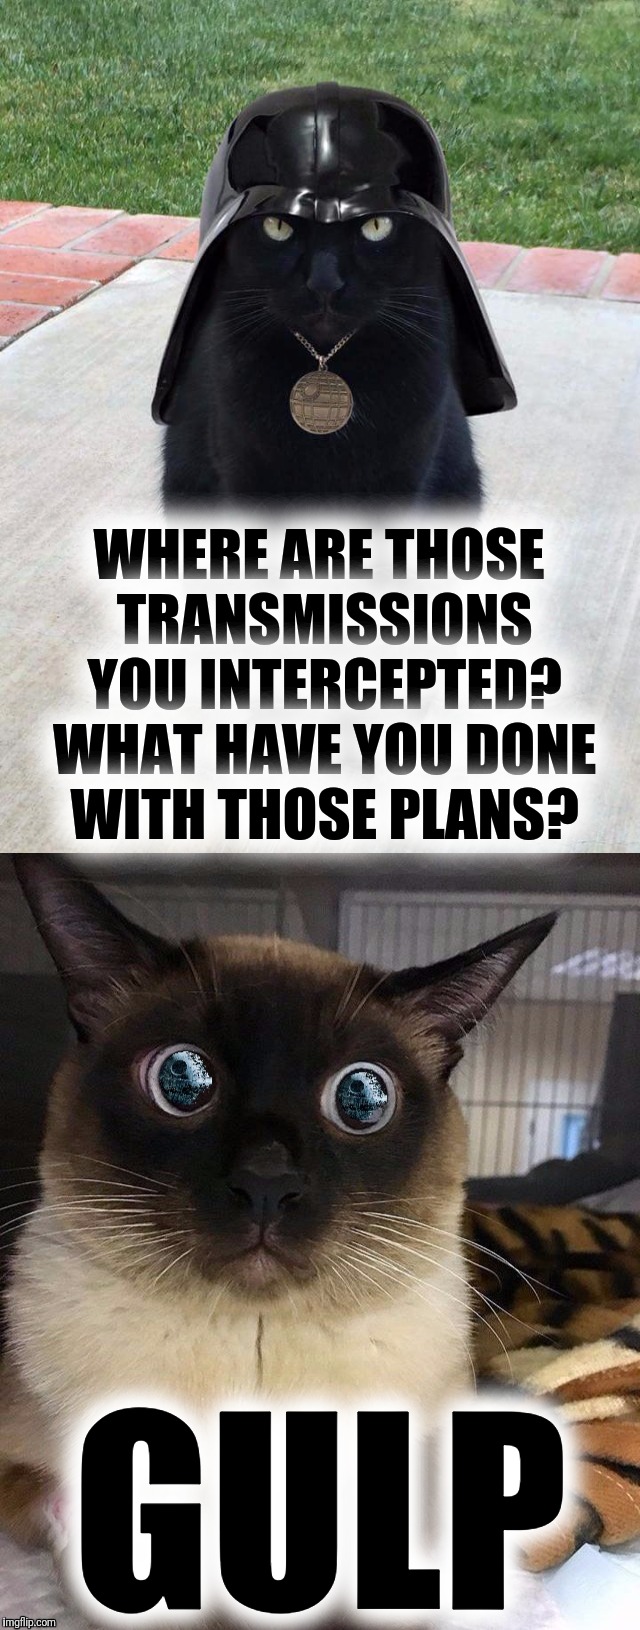 Kitty Cat! What have you done with the Death Star plans? | WHERE ARE THOSE TRANSMISSIONS YOU INTERCEPTED? WHAT HAVE YOU DONE WITH THOSE PLANS? GULP | image tagged in star wars,darth vader,cats,darth vader cat,siamese cat,making plans | made w/ Imgflip meme maker